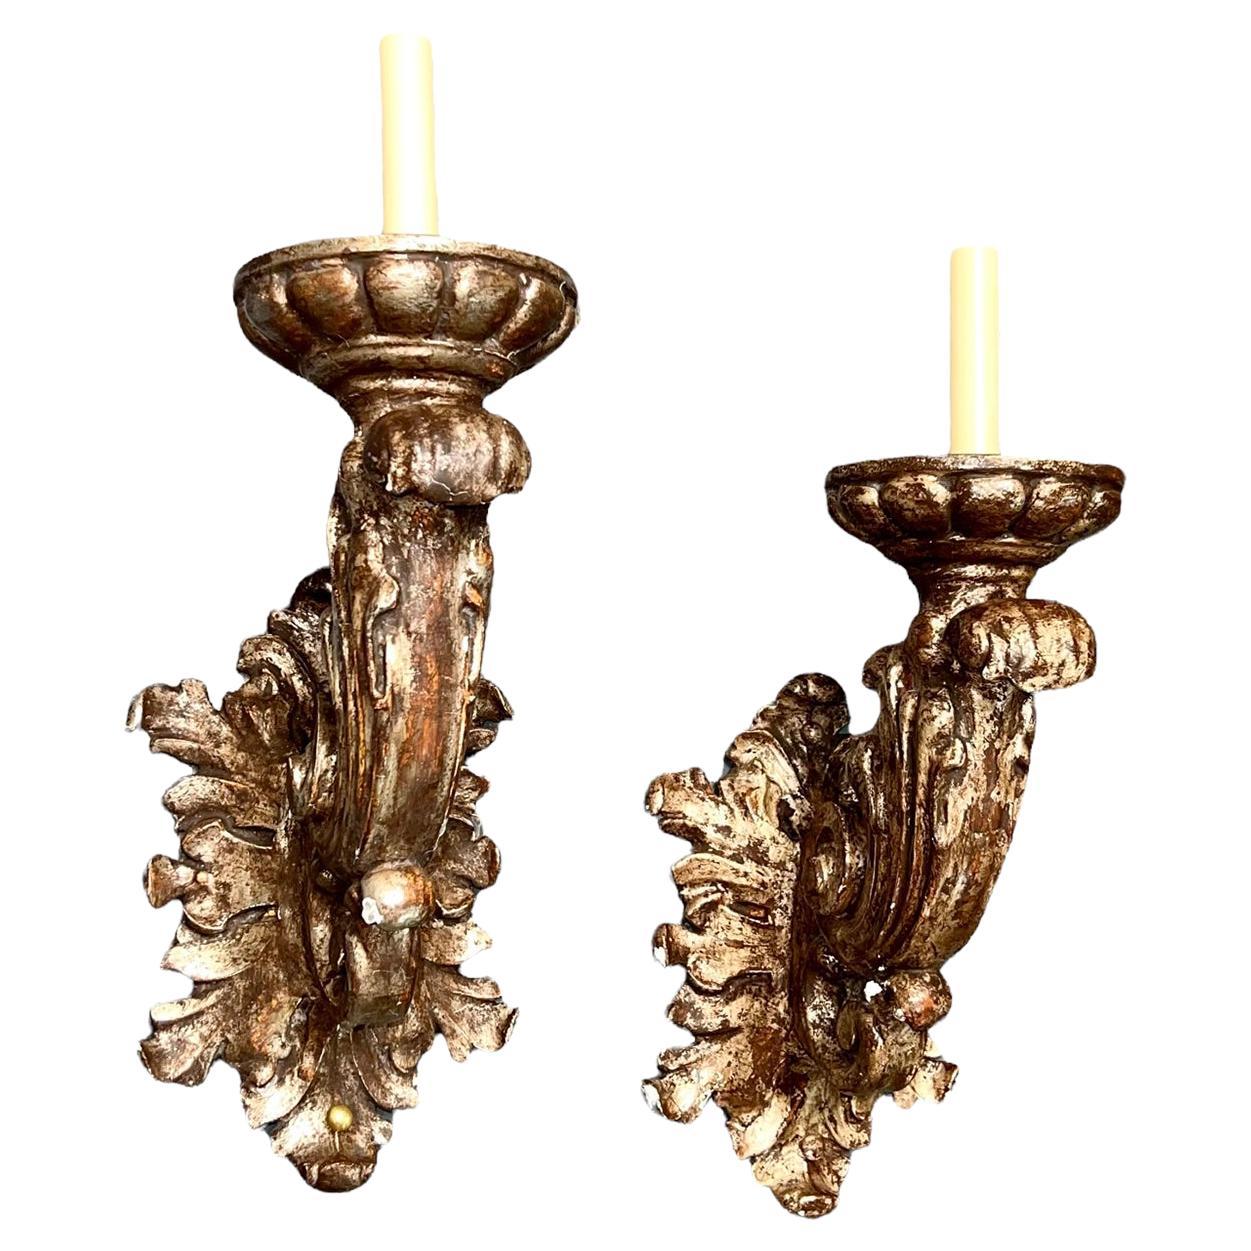 A set of ten Italian circa 1920's wood sconces with silver leaf finish. Sold per pair

Measurements:
Height: 19